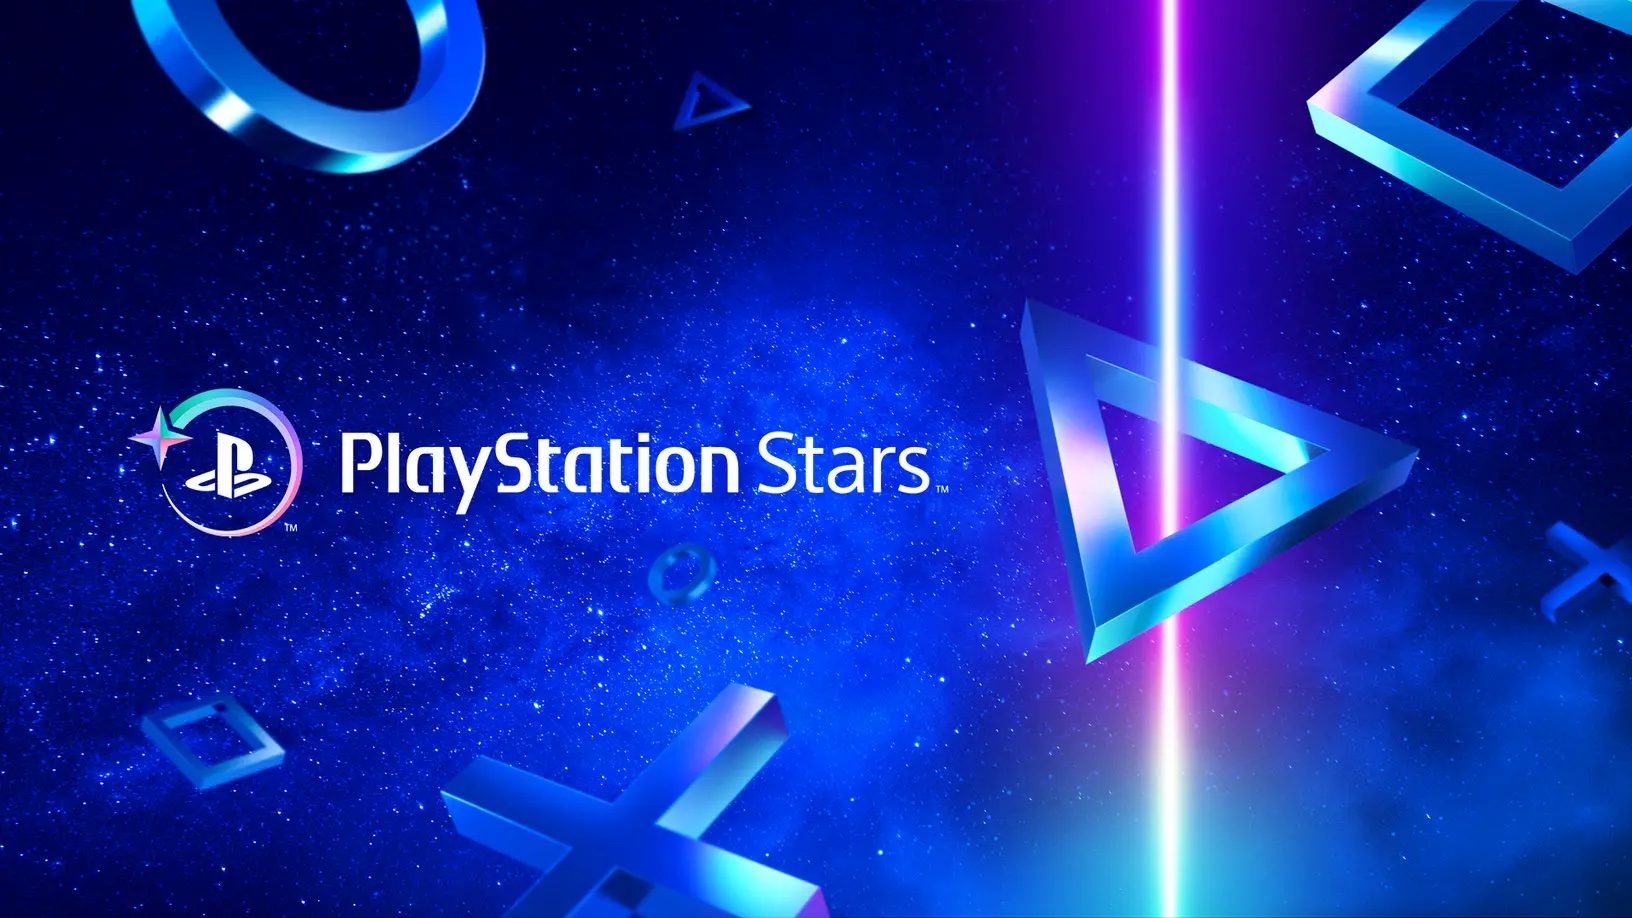 New PlayStation Stars Campaigns for October: Uncover Challenges